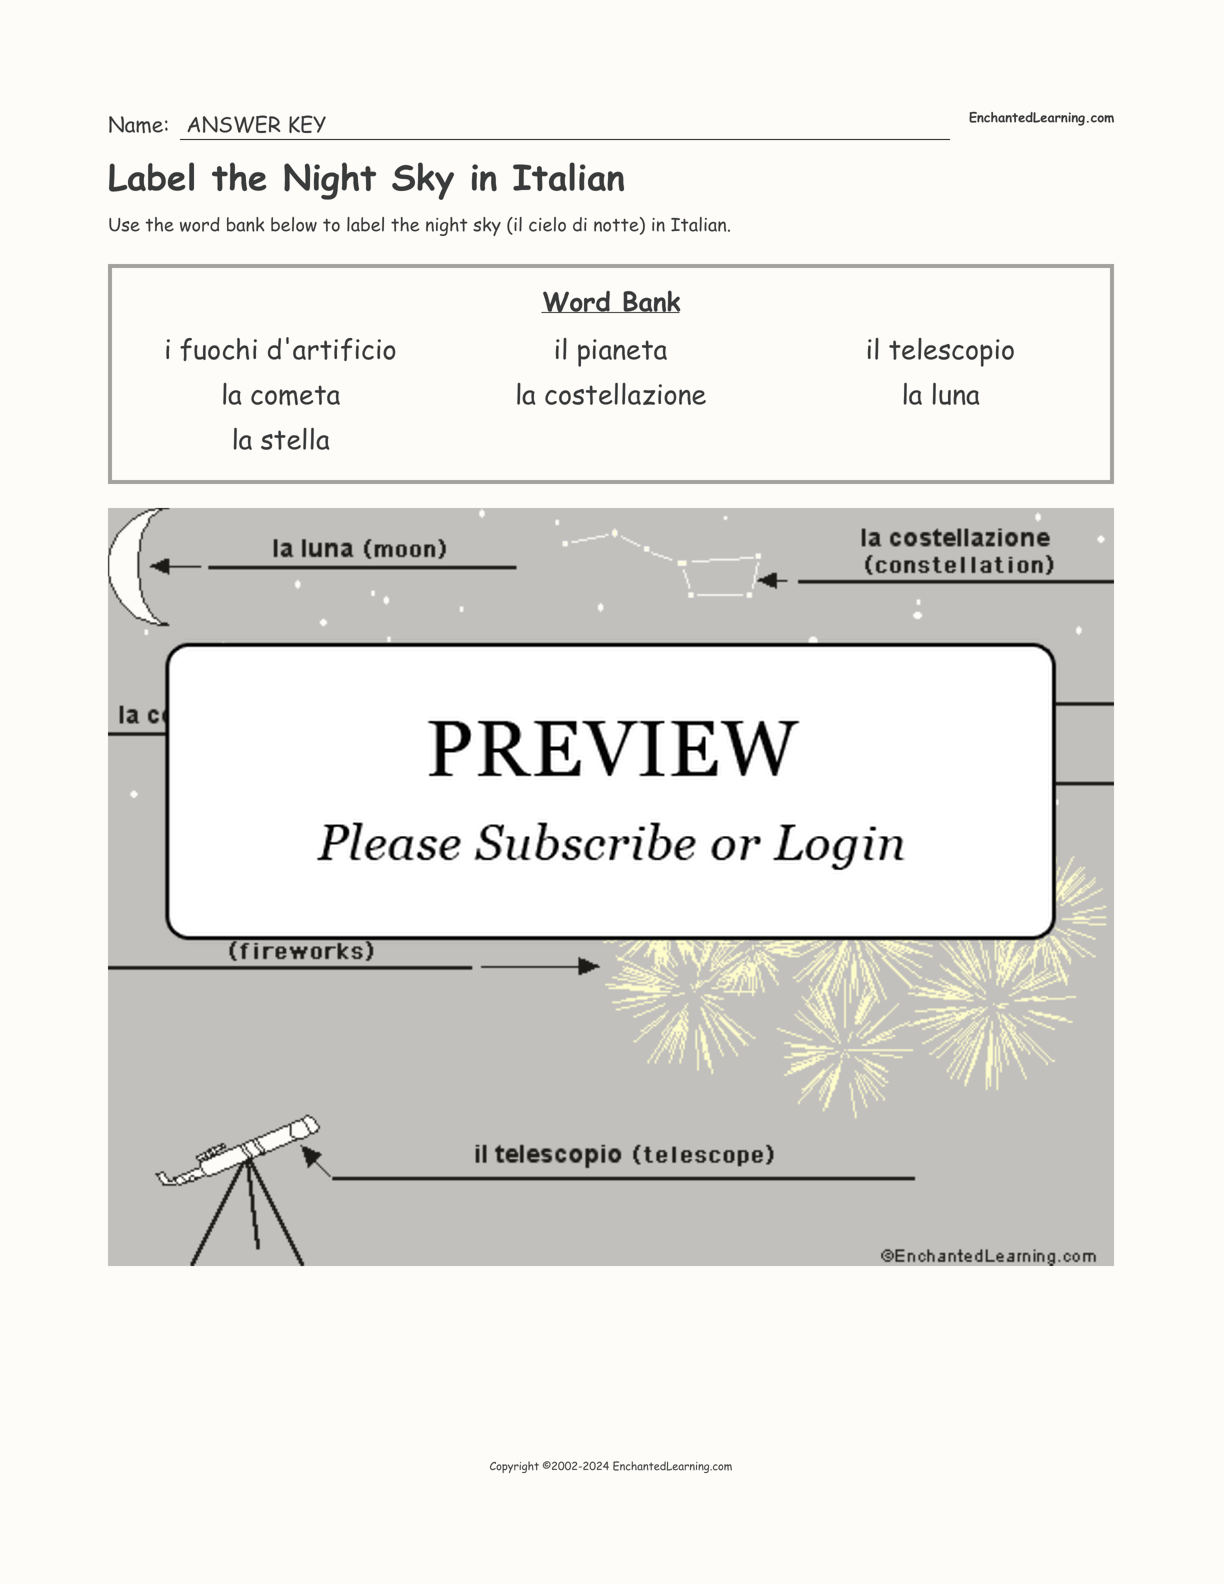 Label the Night Sky in Italian interactive worksheet page 2